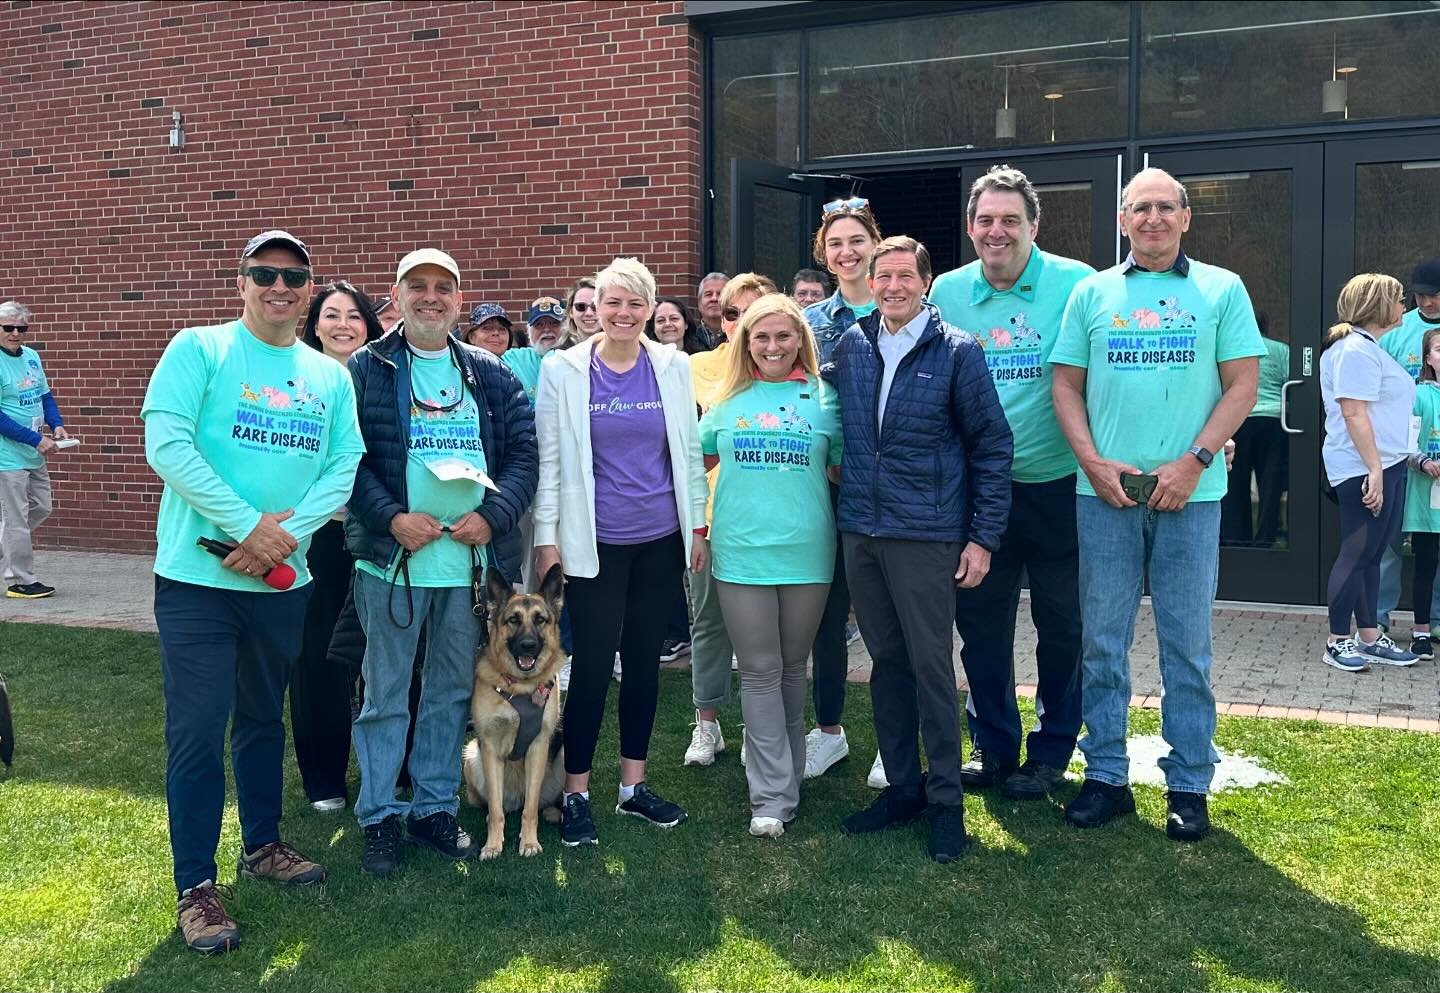 We are so overjoyed with Saturday&rsquo;s weather and turnout for the Denise D&rsquo;Ascenzo Foundation&rsquo;s Walk to Fight Rare Diseases Presented by @gofflaw! #raredisease Thank you to our charity partners @alsunitedct, @projectpurple, @rsdsa_off